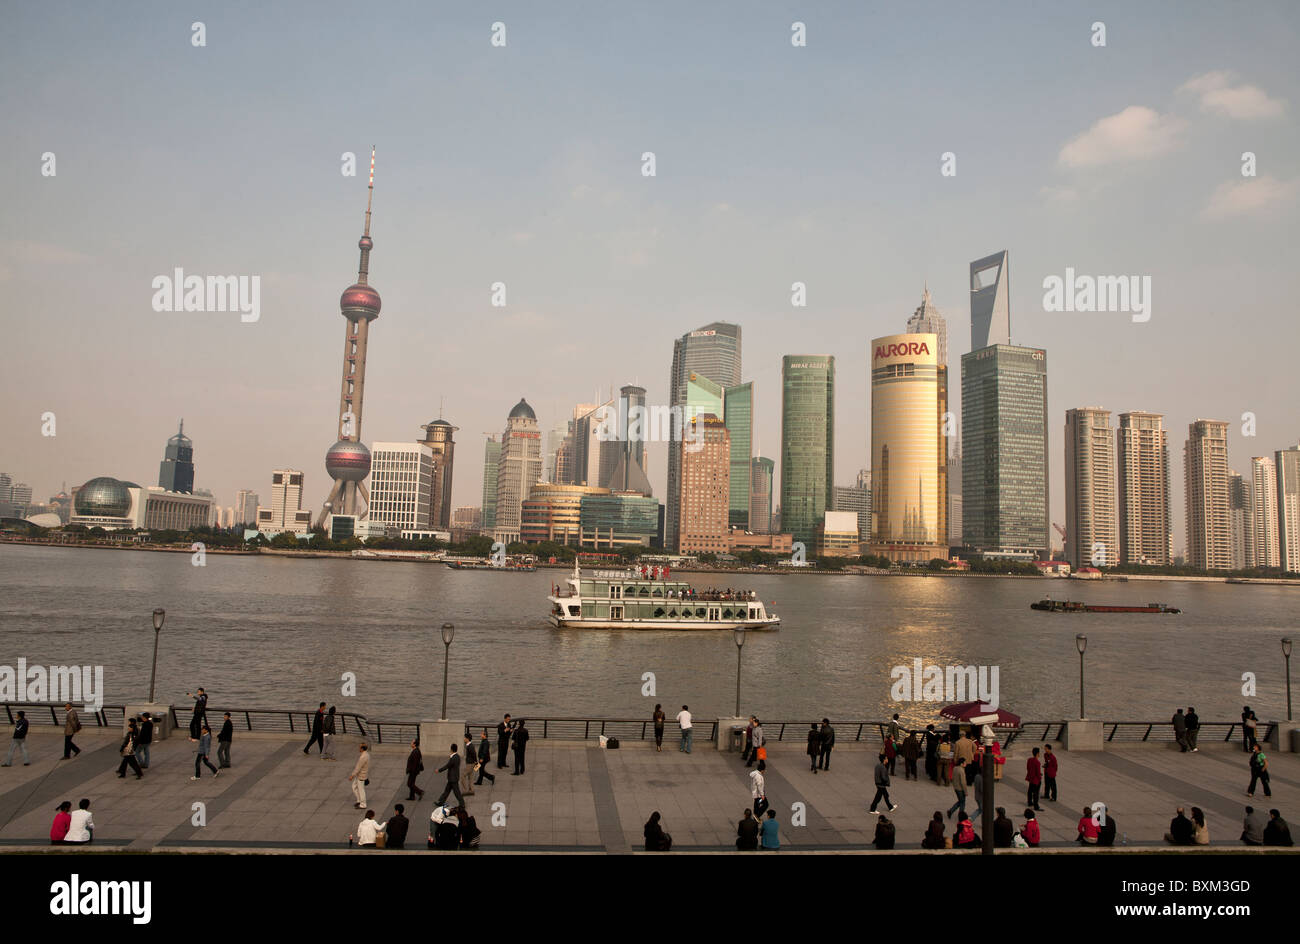 The Bund promenade with a view of Pudong, Shanghai, China Stock Photo